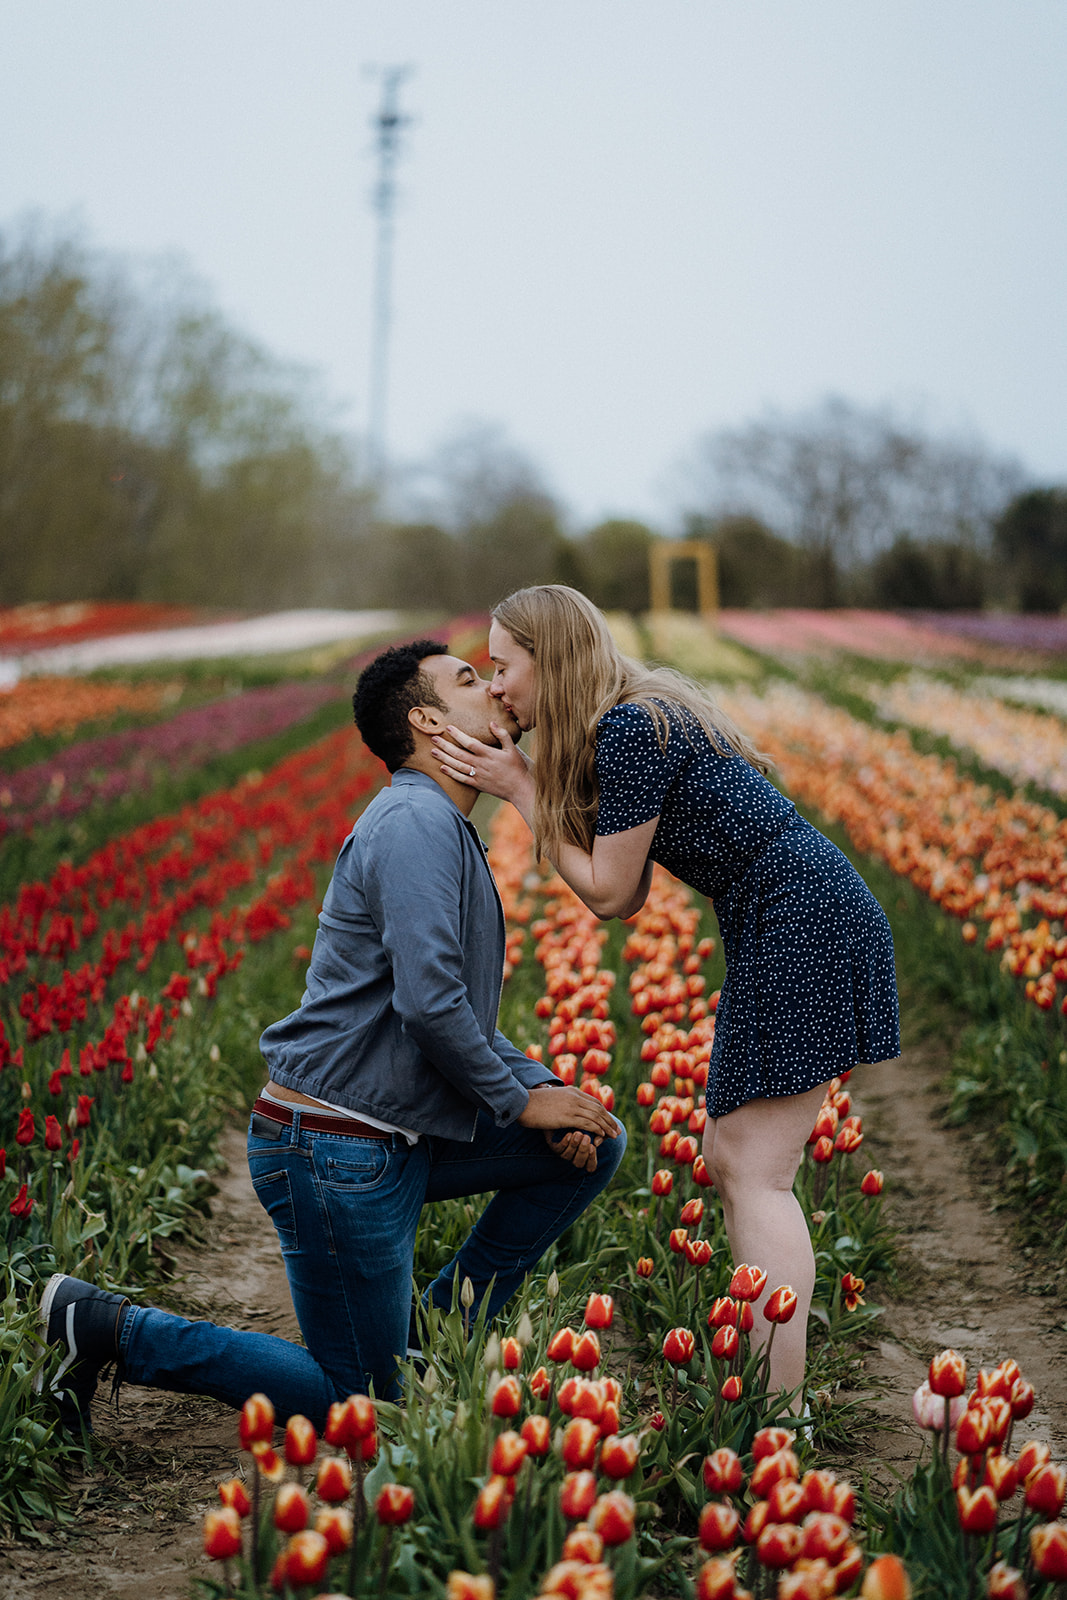 Man kneeling in tulips while his fiancé kisses him.